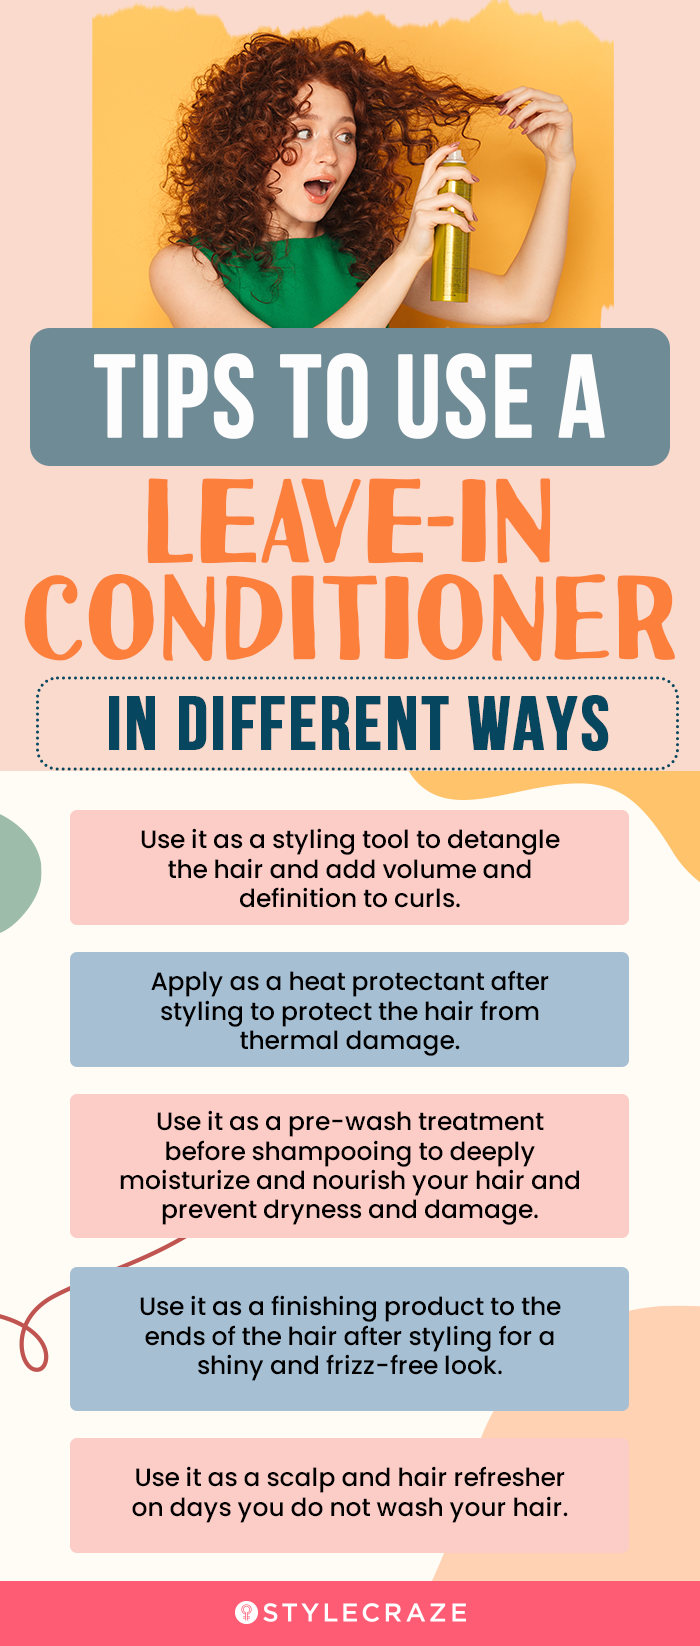 Tips To Use A Leave-In Conditioner In Different Ways (infographic)